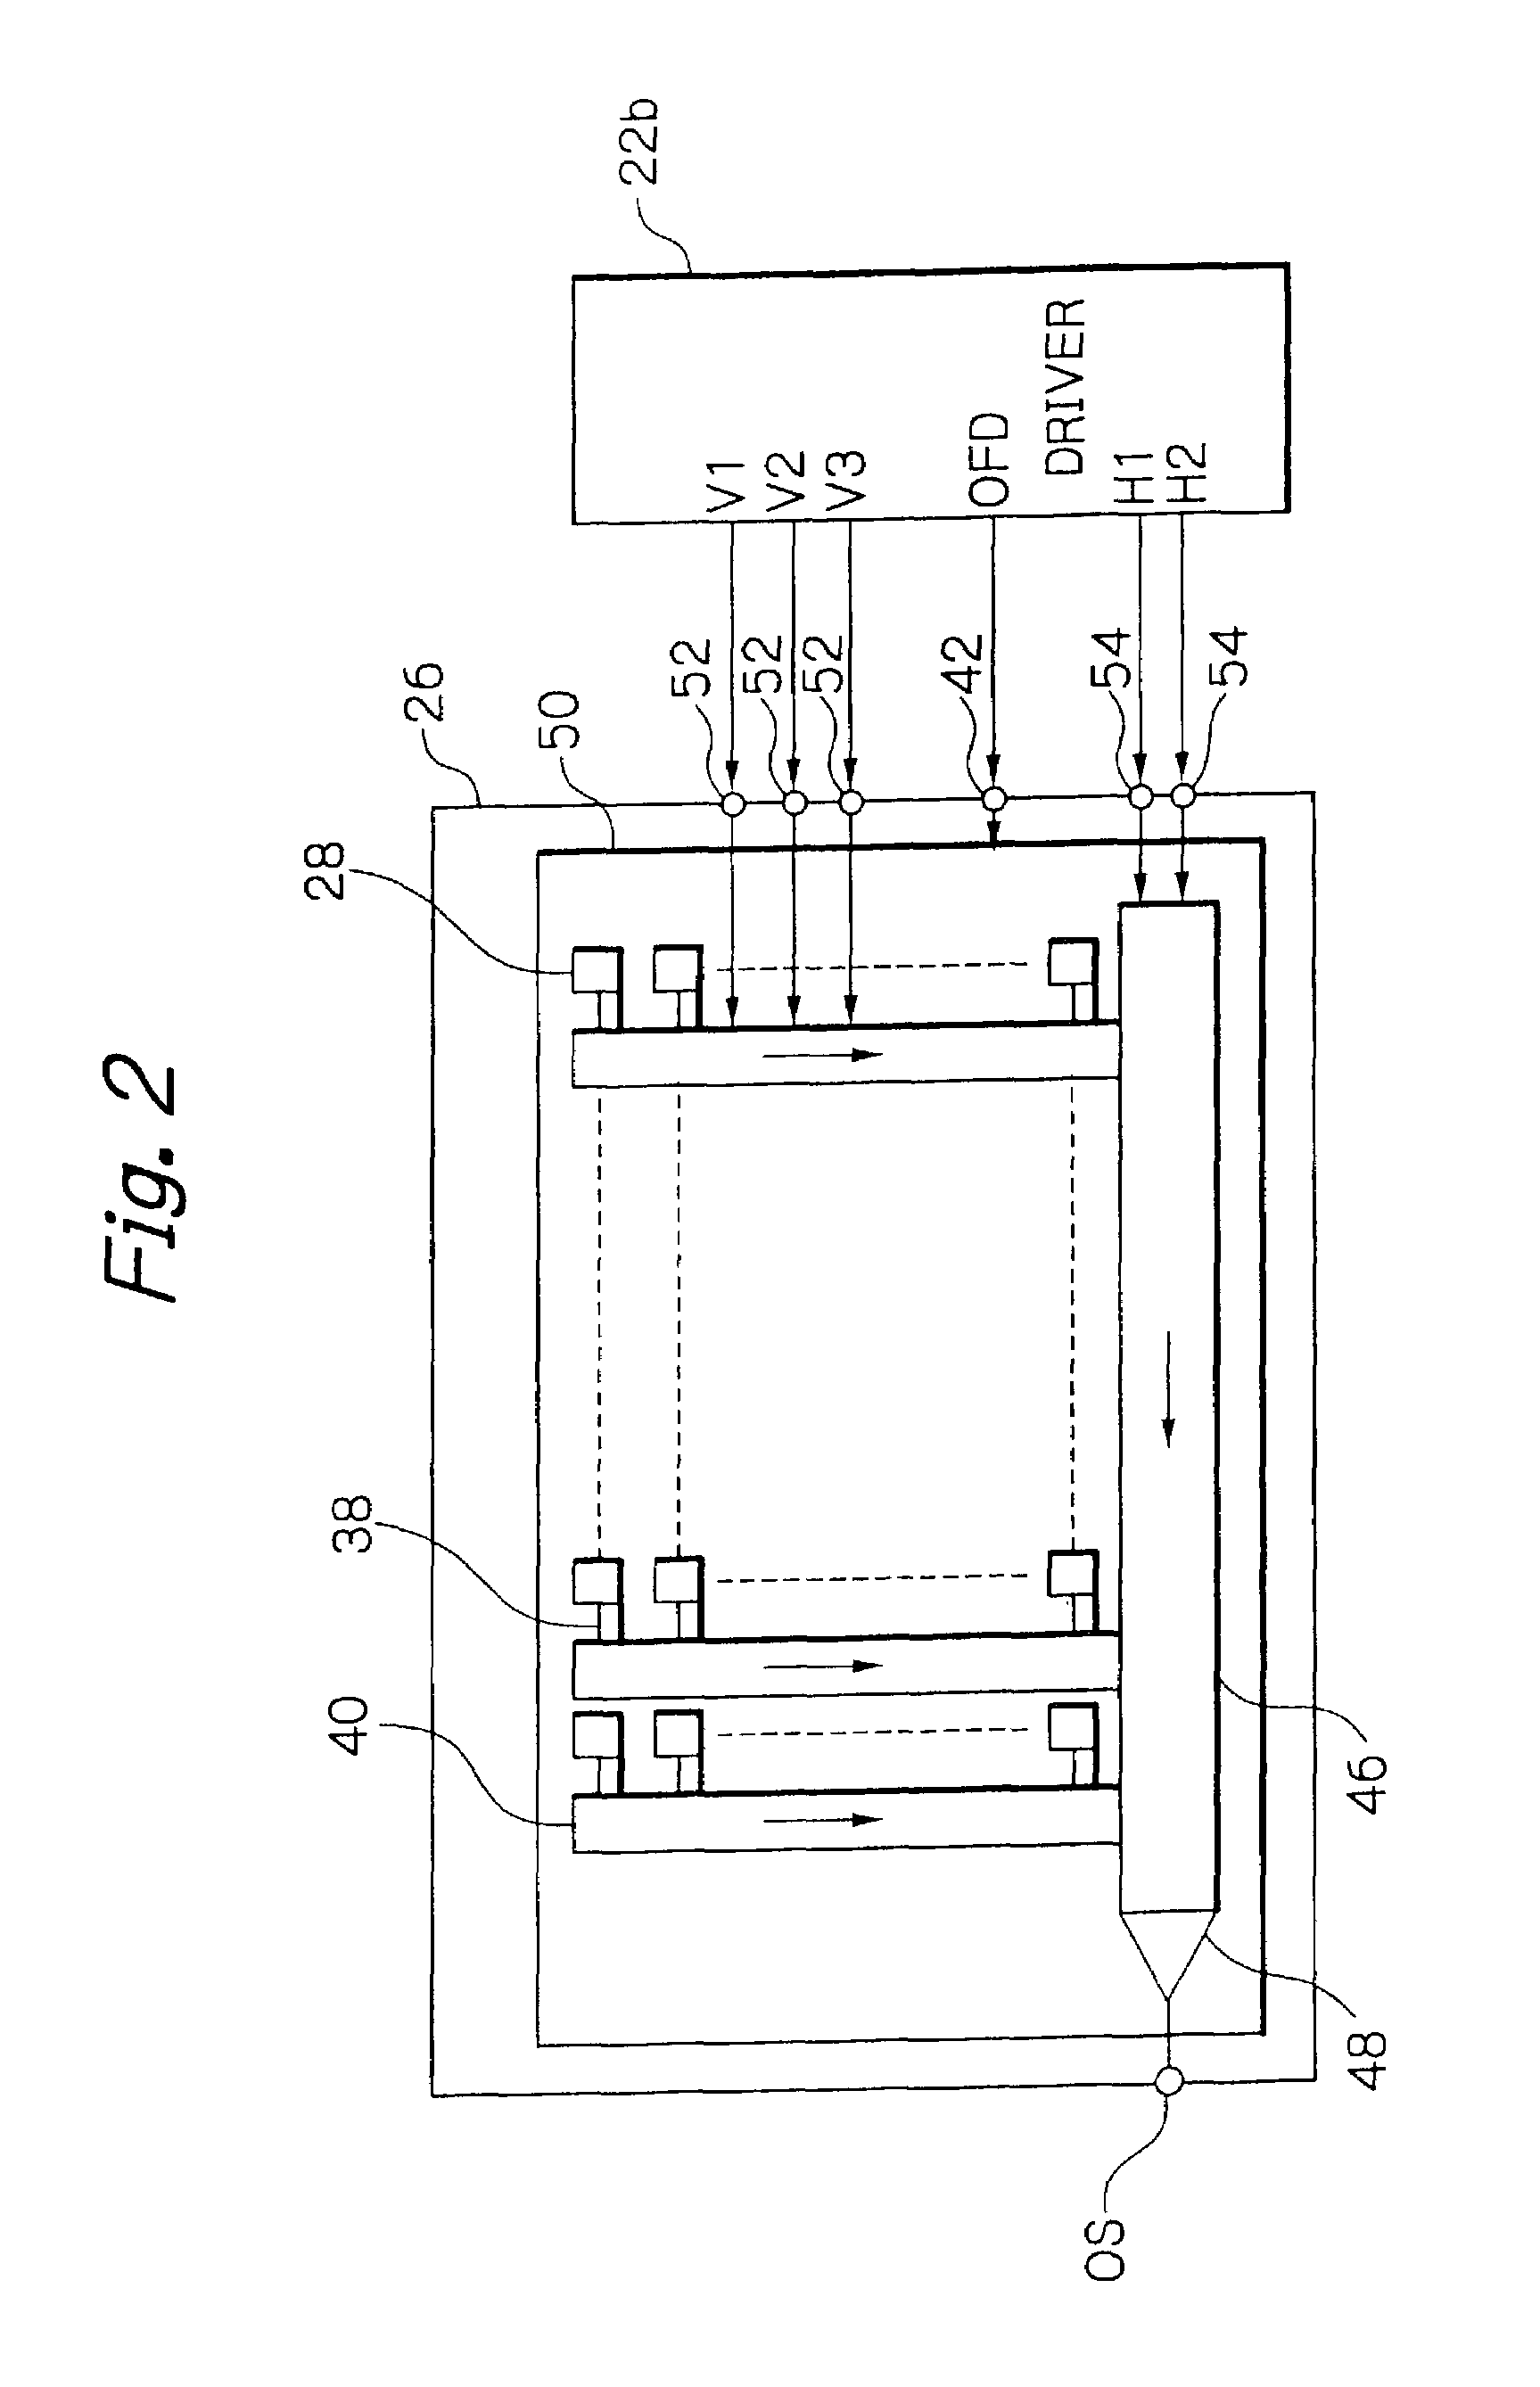 Solid-state imaging apparatus for controlling a sweep transfer period in dependence upon the amount of unnecessary charges to be swept out